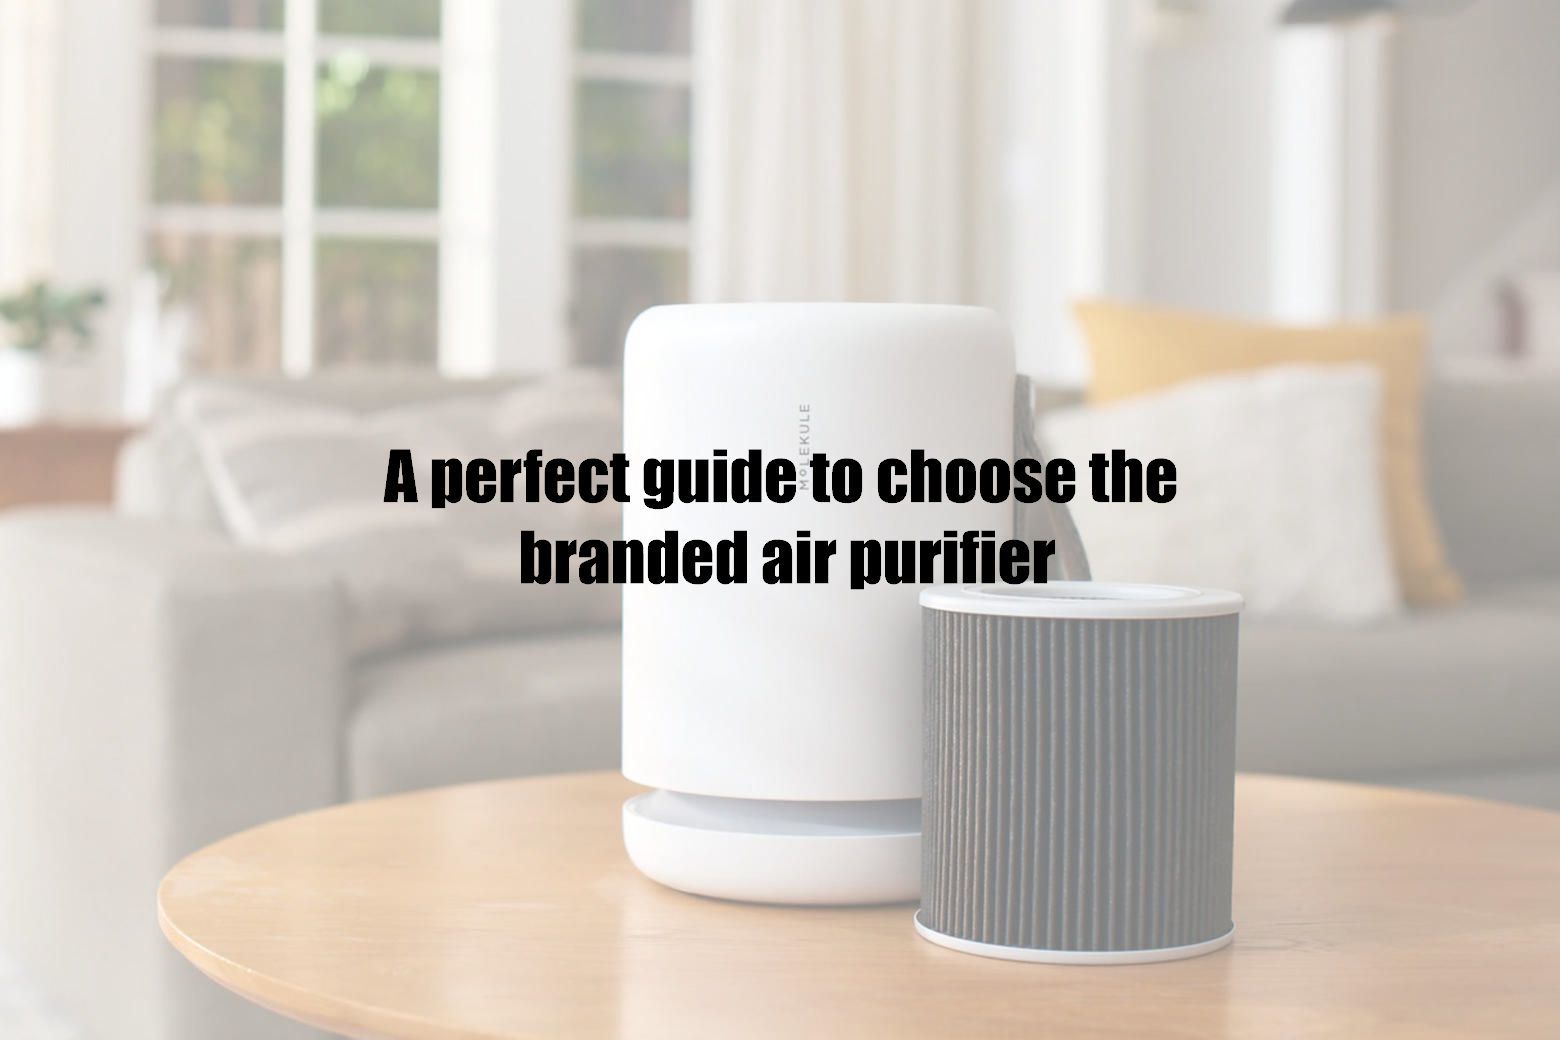 A perfect guide to choose the branded air purifier